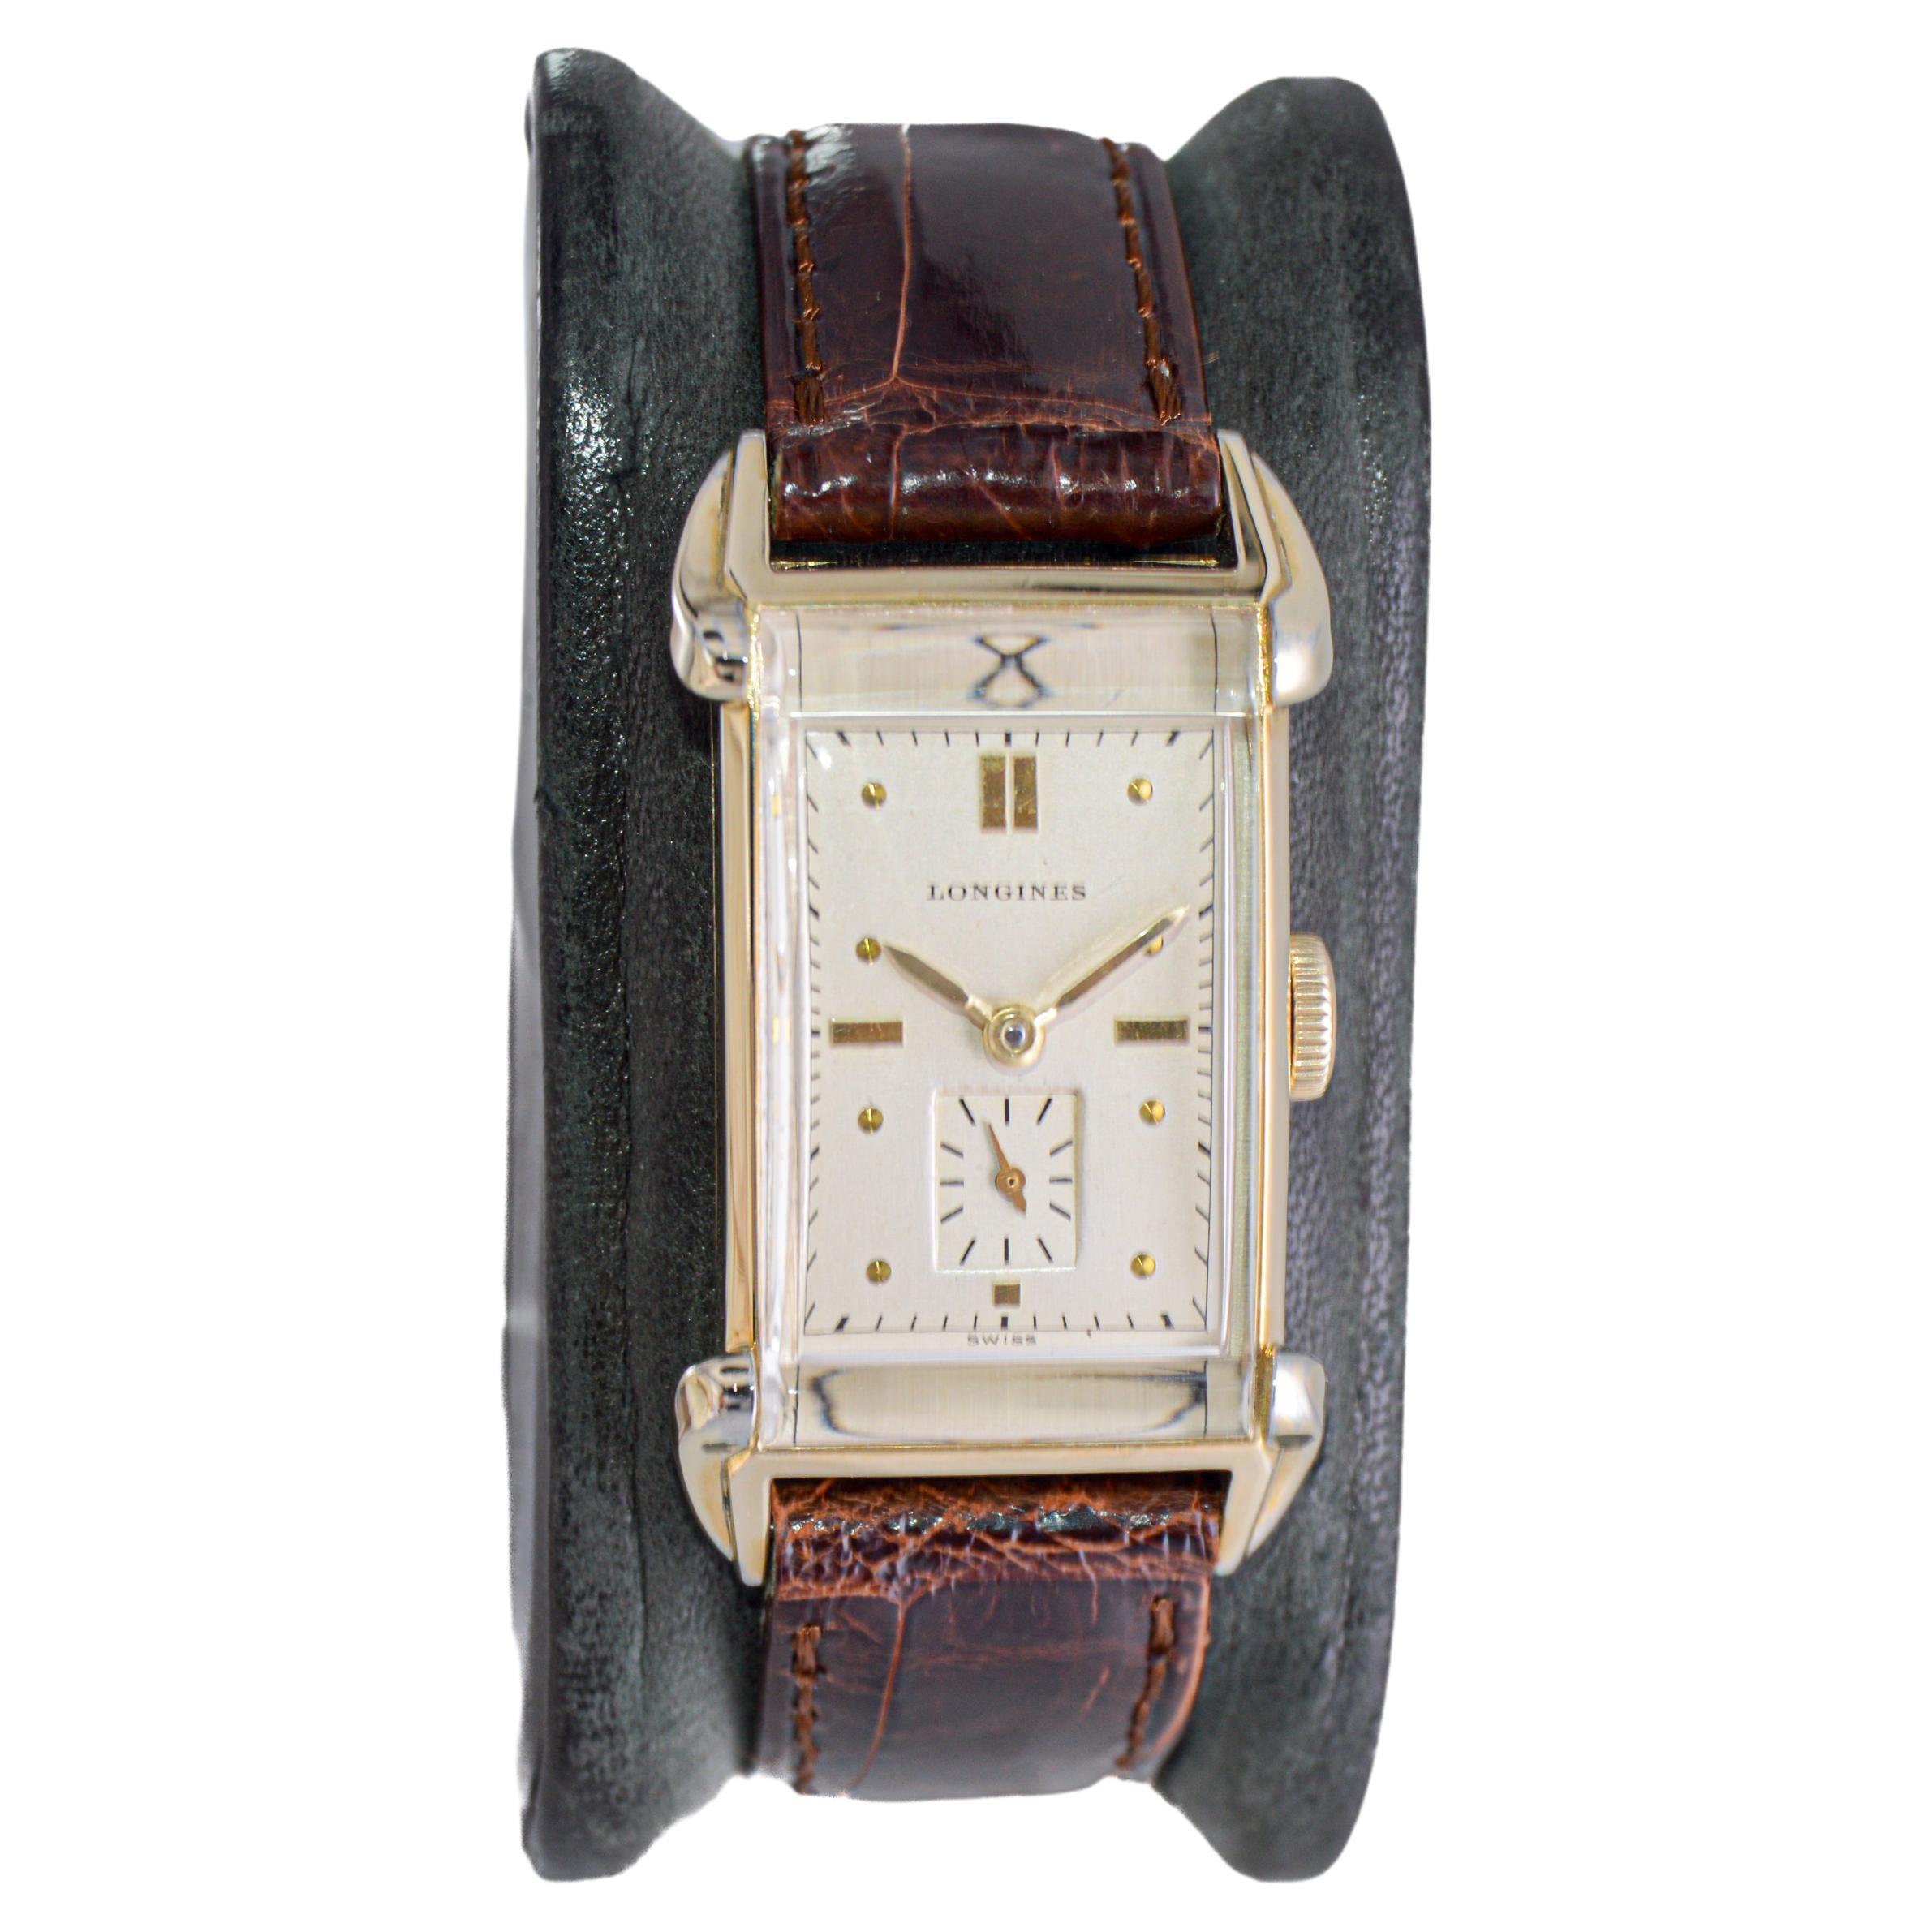 FACTORY / HOUSE: Longines Watch Company
STYLE / REFERENCE: Art Deco / Tank Style 
METAL / MATERIAL: Yellow Gold Filled
CIRCA / YEAR: 1940's
DIMENSIONS / SIZE: Length 23mm x Width 41mm
MOVEMENT / CALIBER: Manual Winding / 17 Jewels / Caliber 9L
DIAL